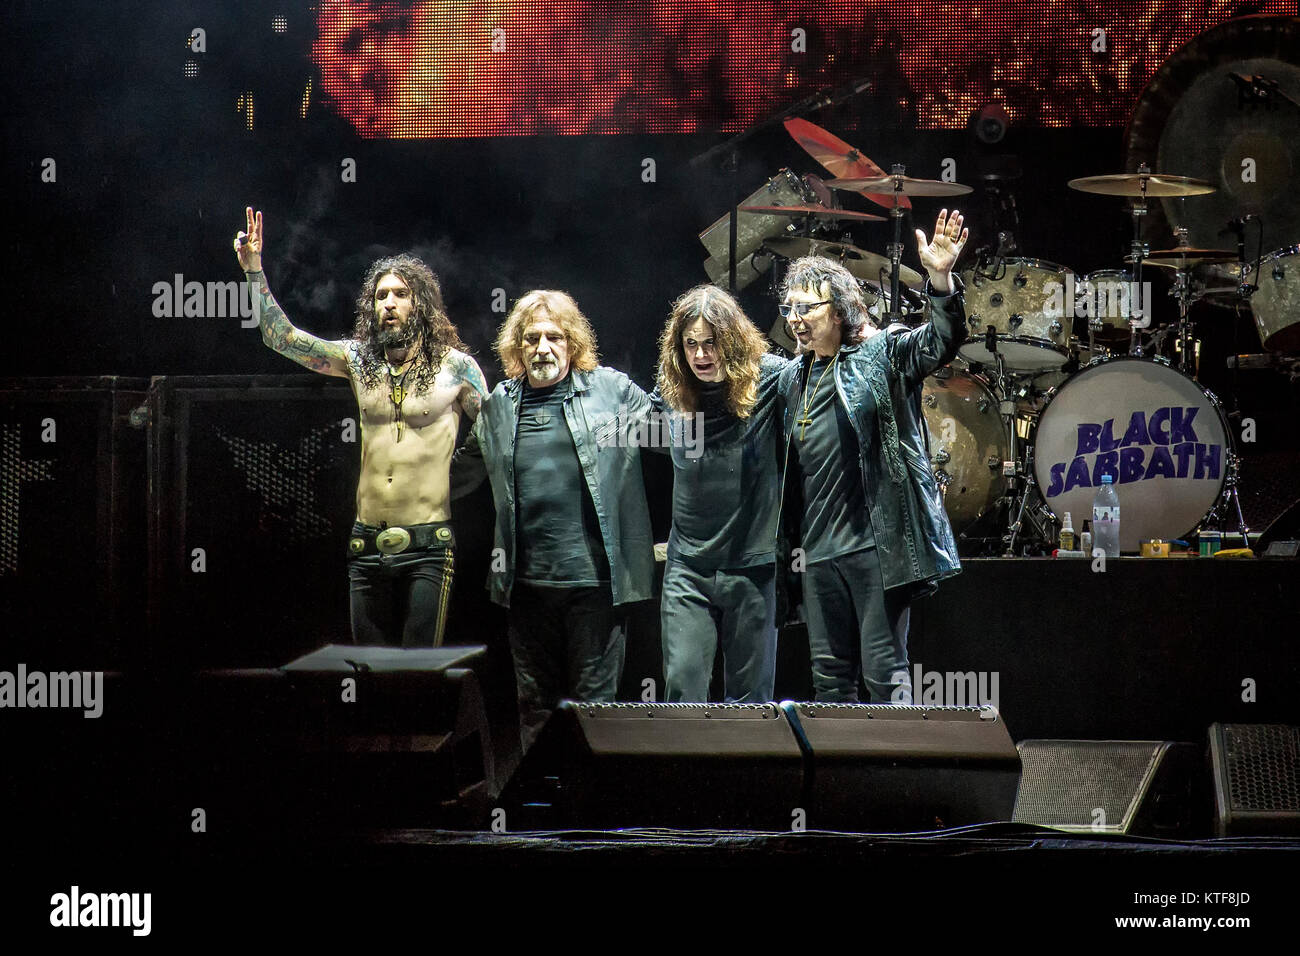 The English rock band Black Sabbath performs a live concert at the Norwegian music festival Tons of Rock 2016. Here singer and TV-celebrity Ozzy Osbourne is seen live on stage with drummer Tommy Clufetos (lef), bass player Geezer Butler (two from left) and guitarist Tony Iommi (R). Norway, 23/06 2016. Stock Photo